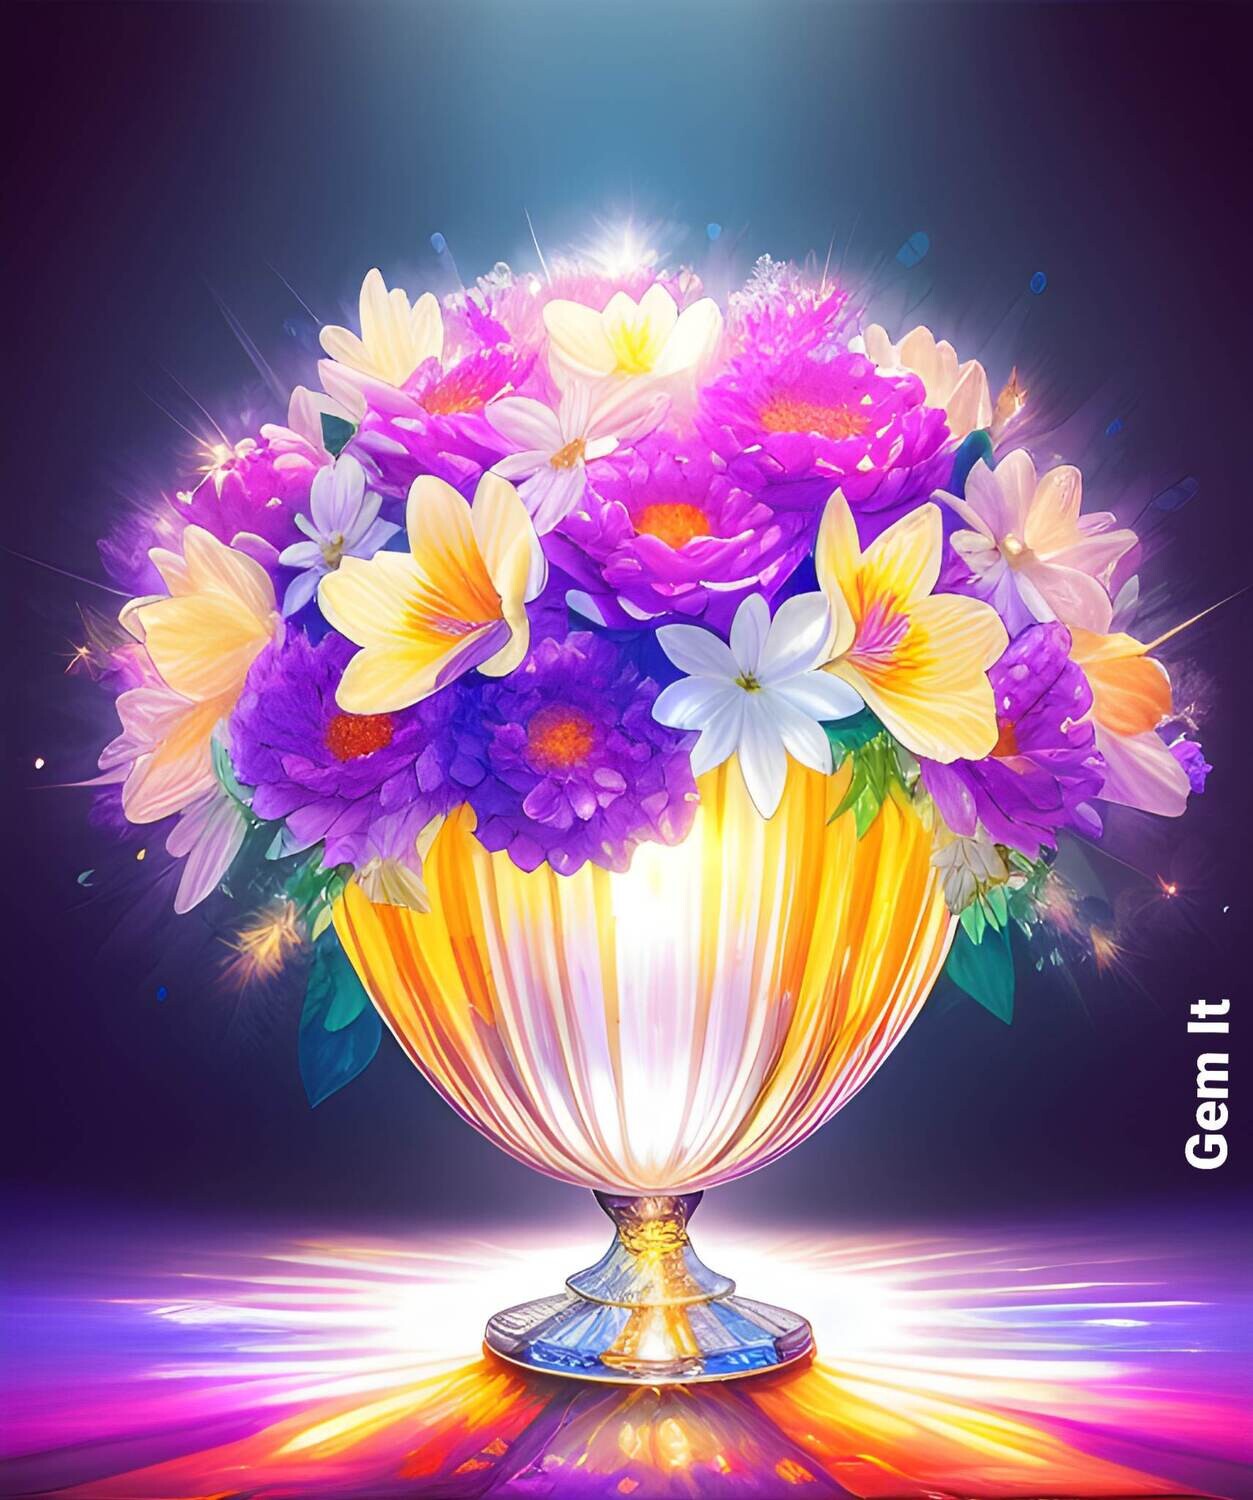 Crystal Vase of Flowers 3 - Specially ordered for you. Delivery is approximately 4 - 6 weeks.